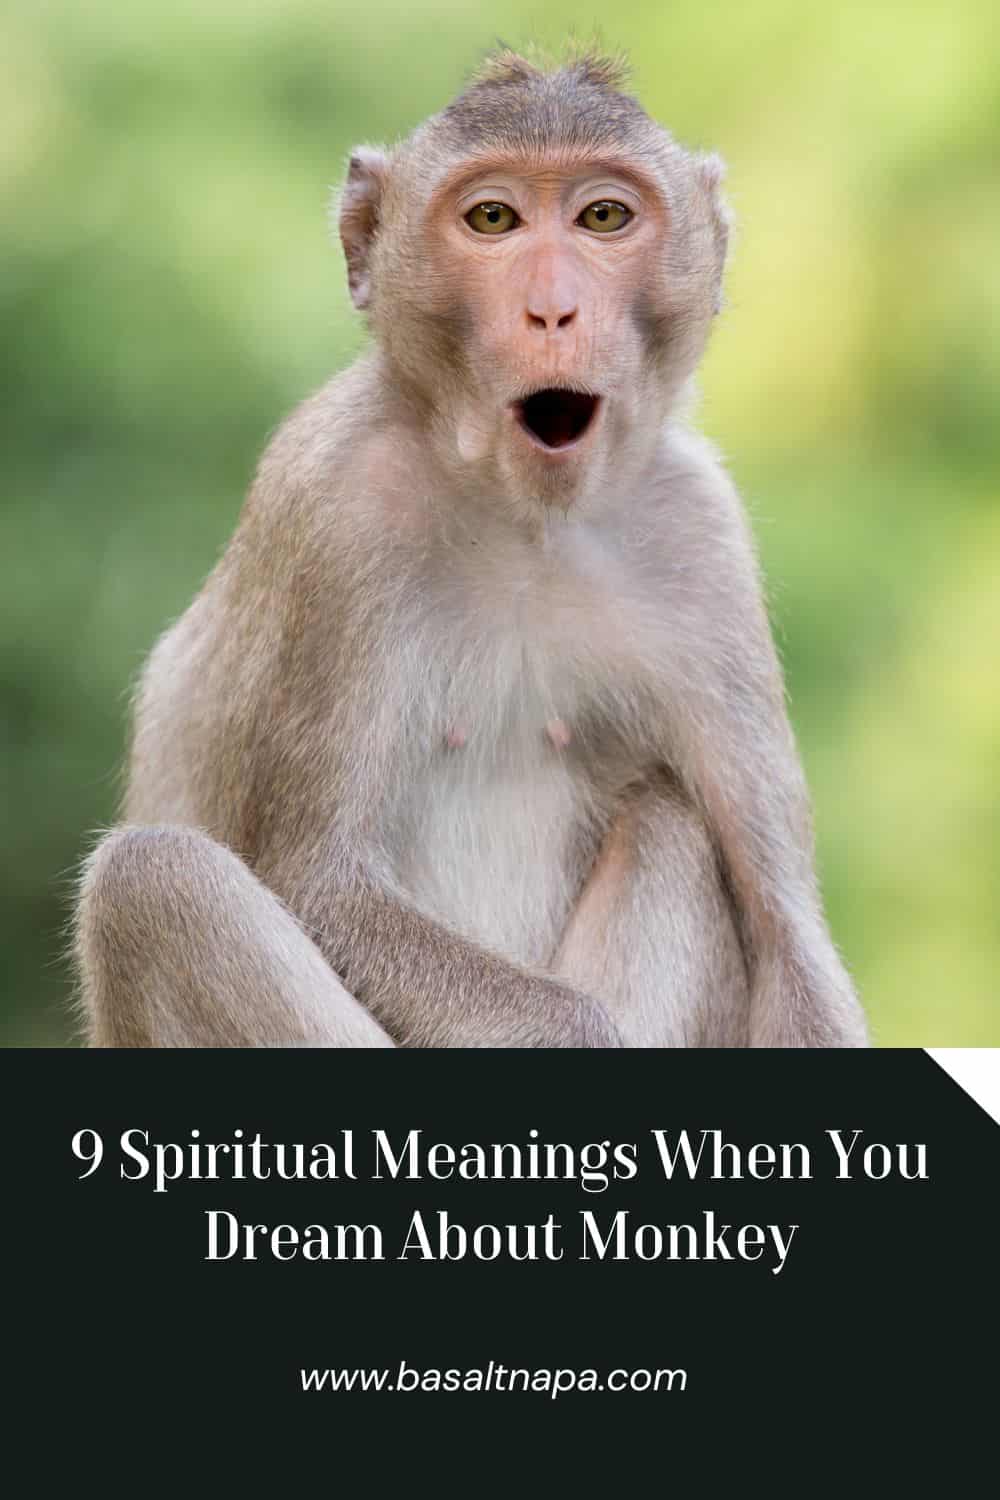 9 Spiritual Meanings When You Dream About Monkey